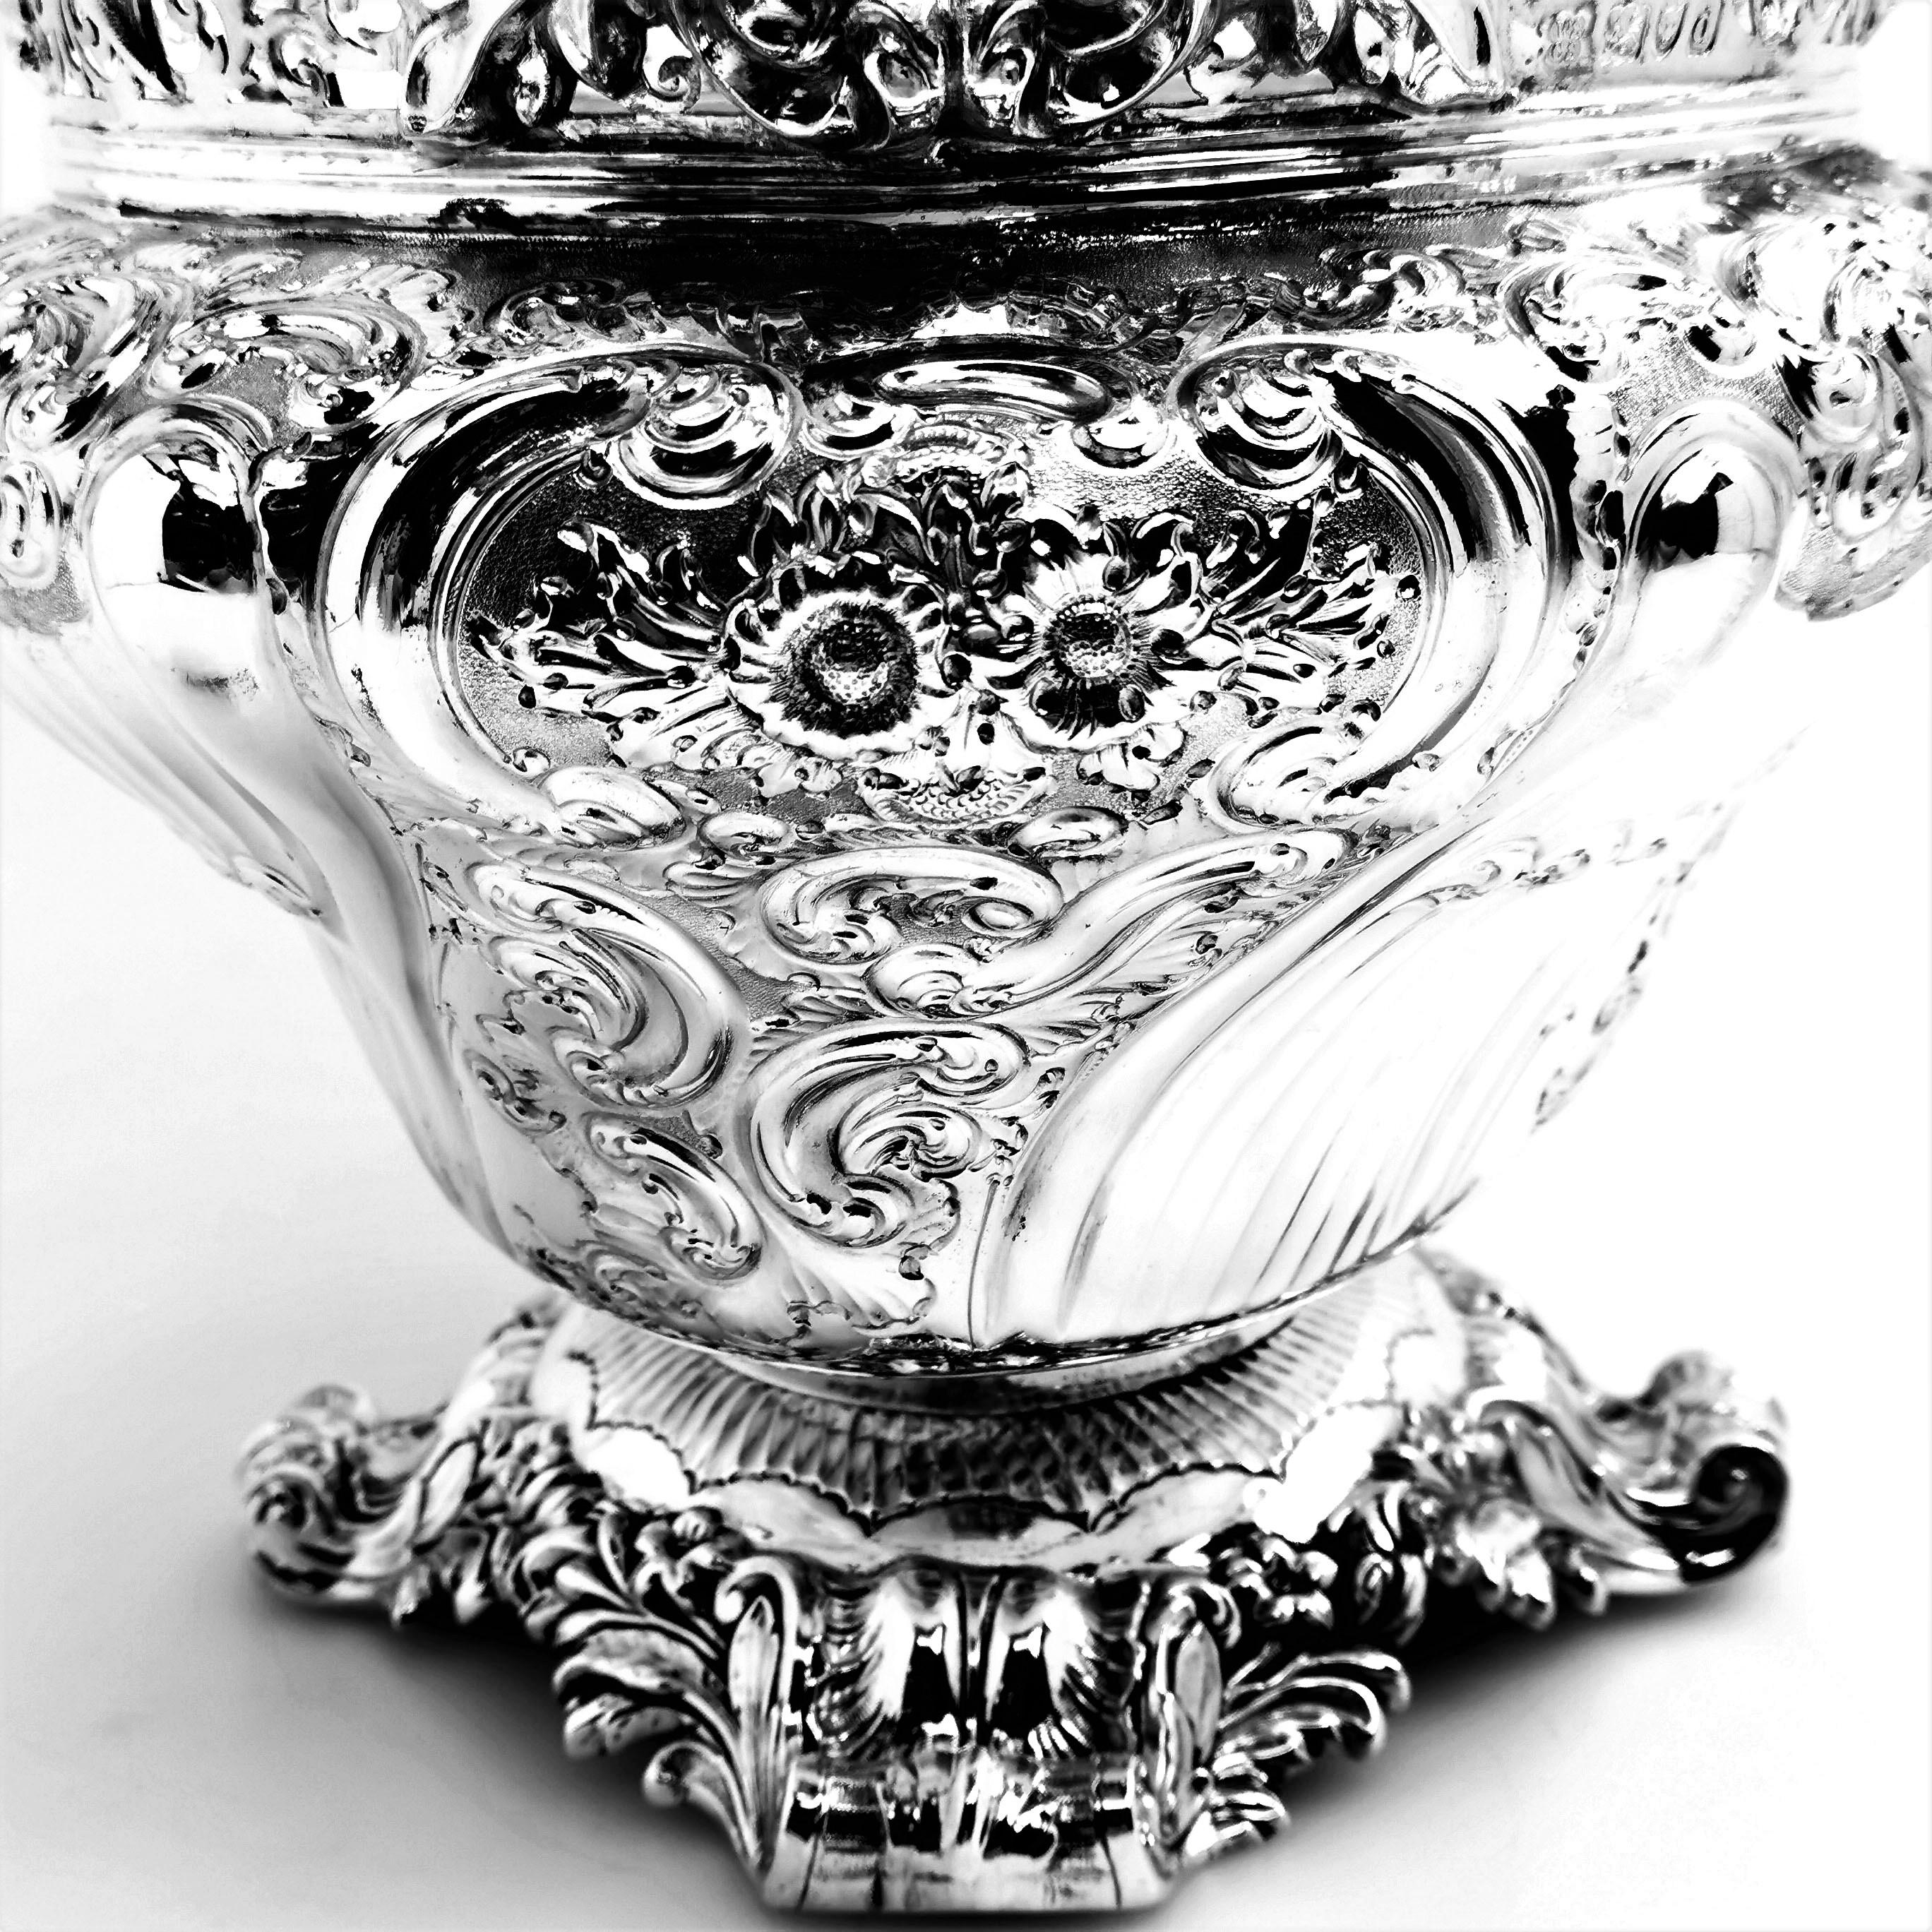 Antique Victorian Sterling Silver Bowl / Dish / Centrepiece, 1899 2